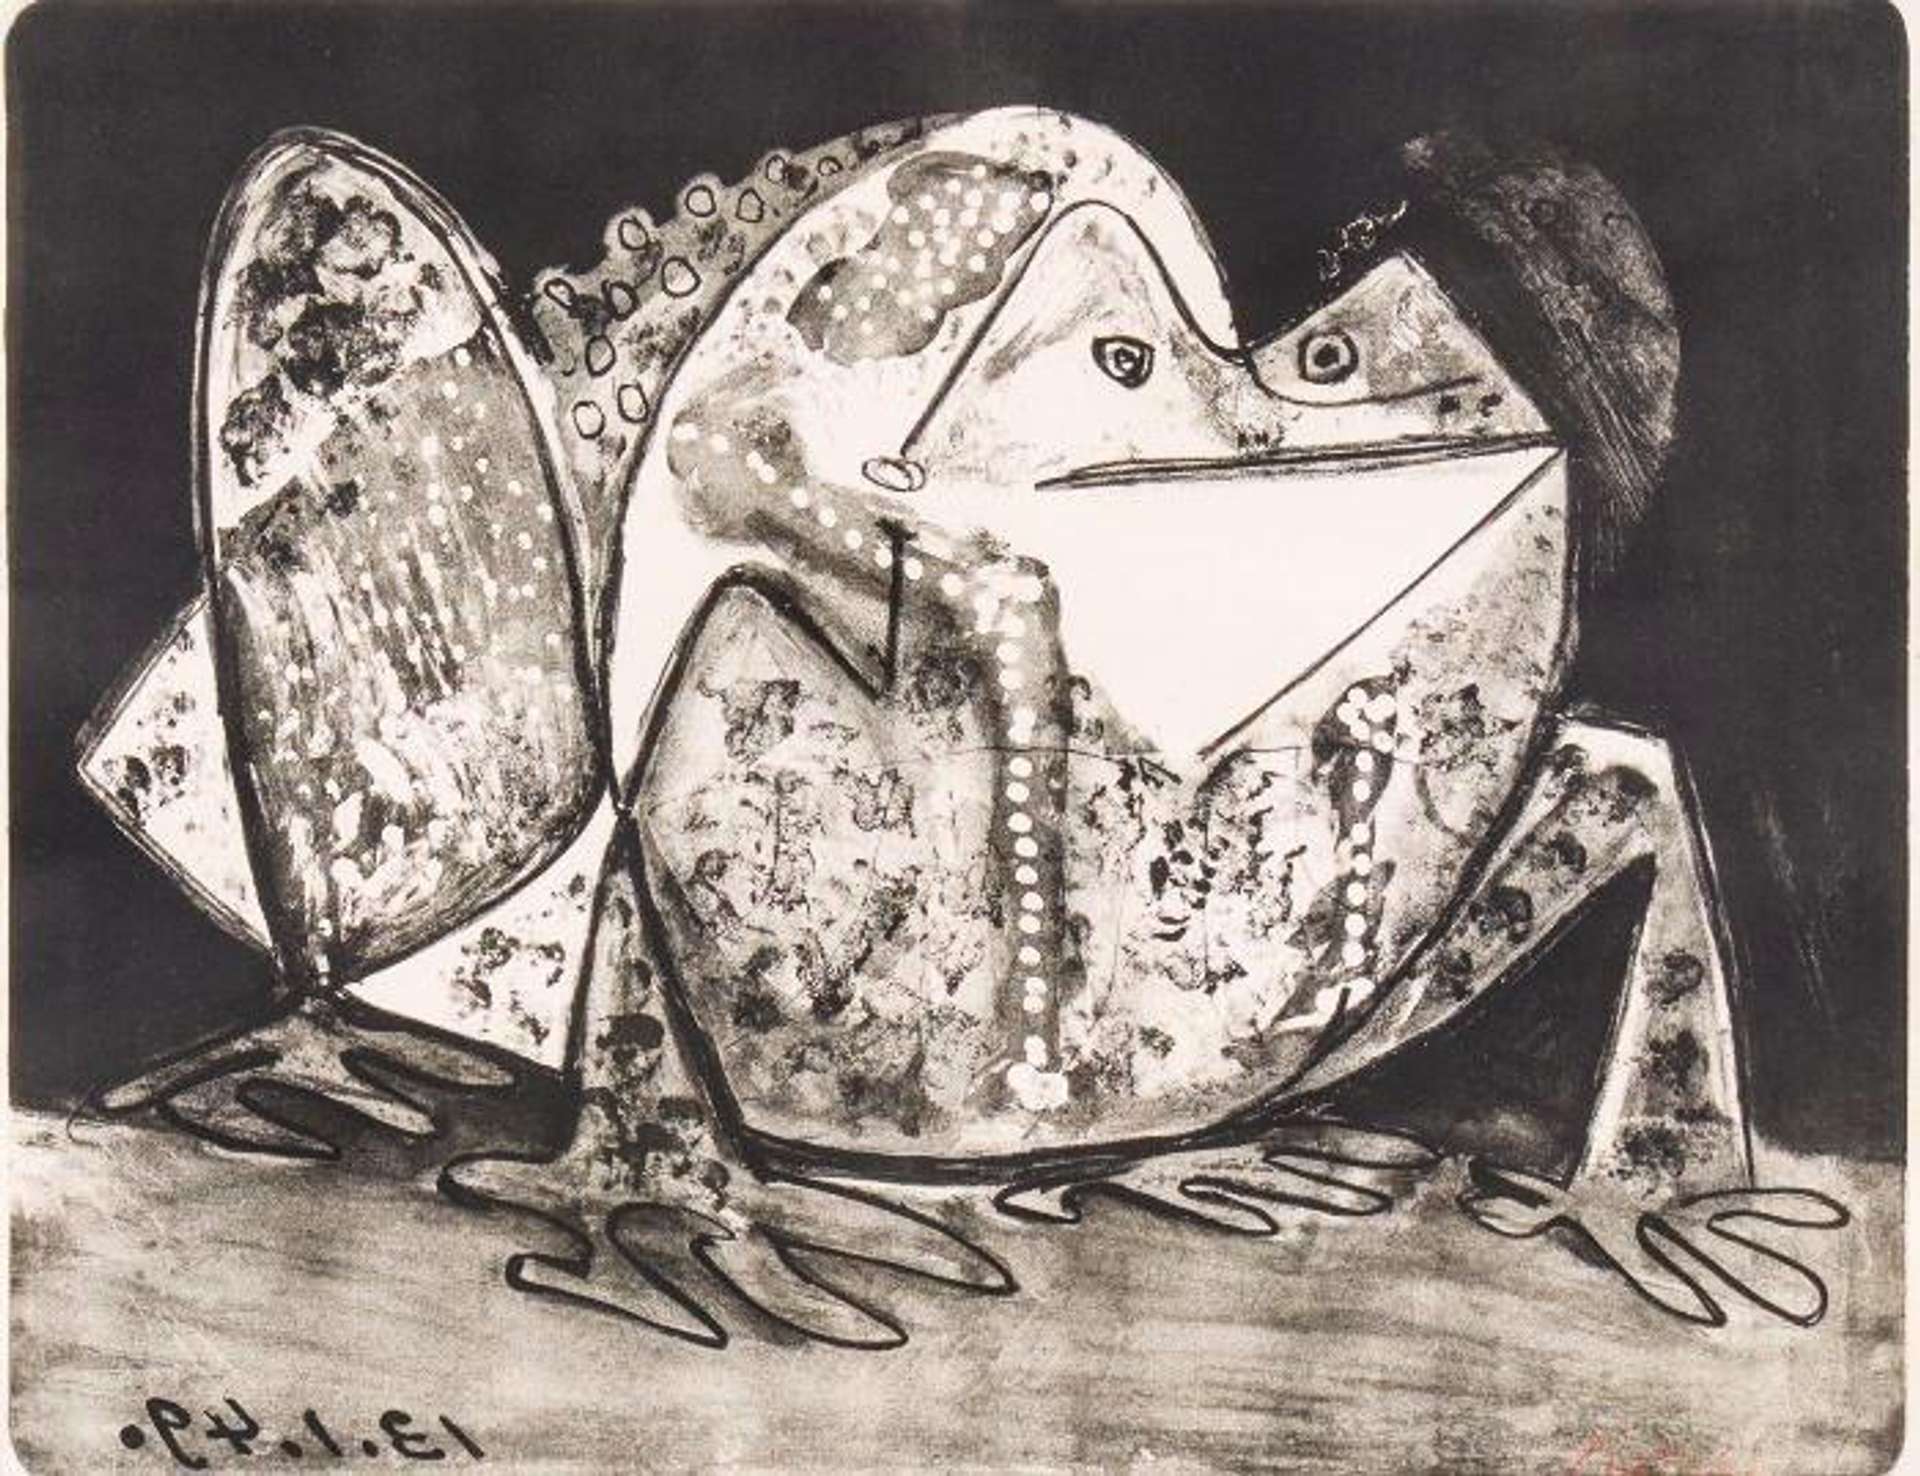 Le Crapaud - Signed Print by Pablo Picasso 1949 - MyArtBroker